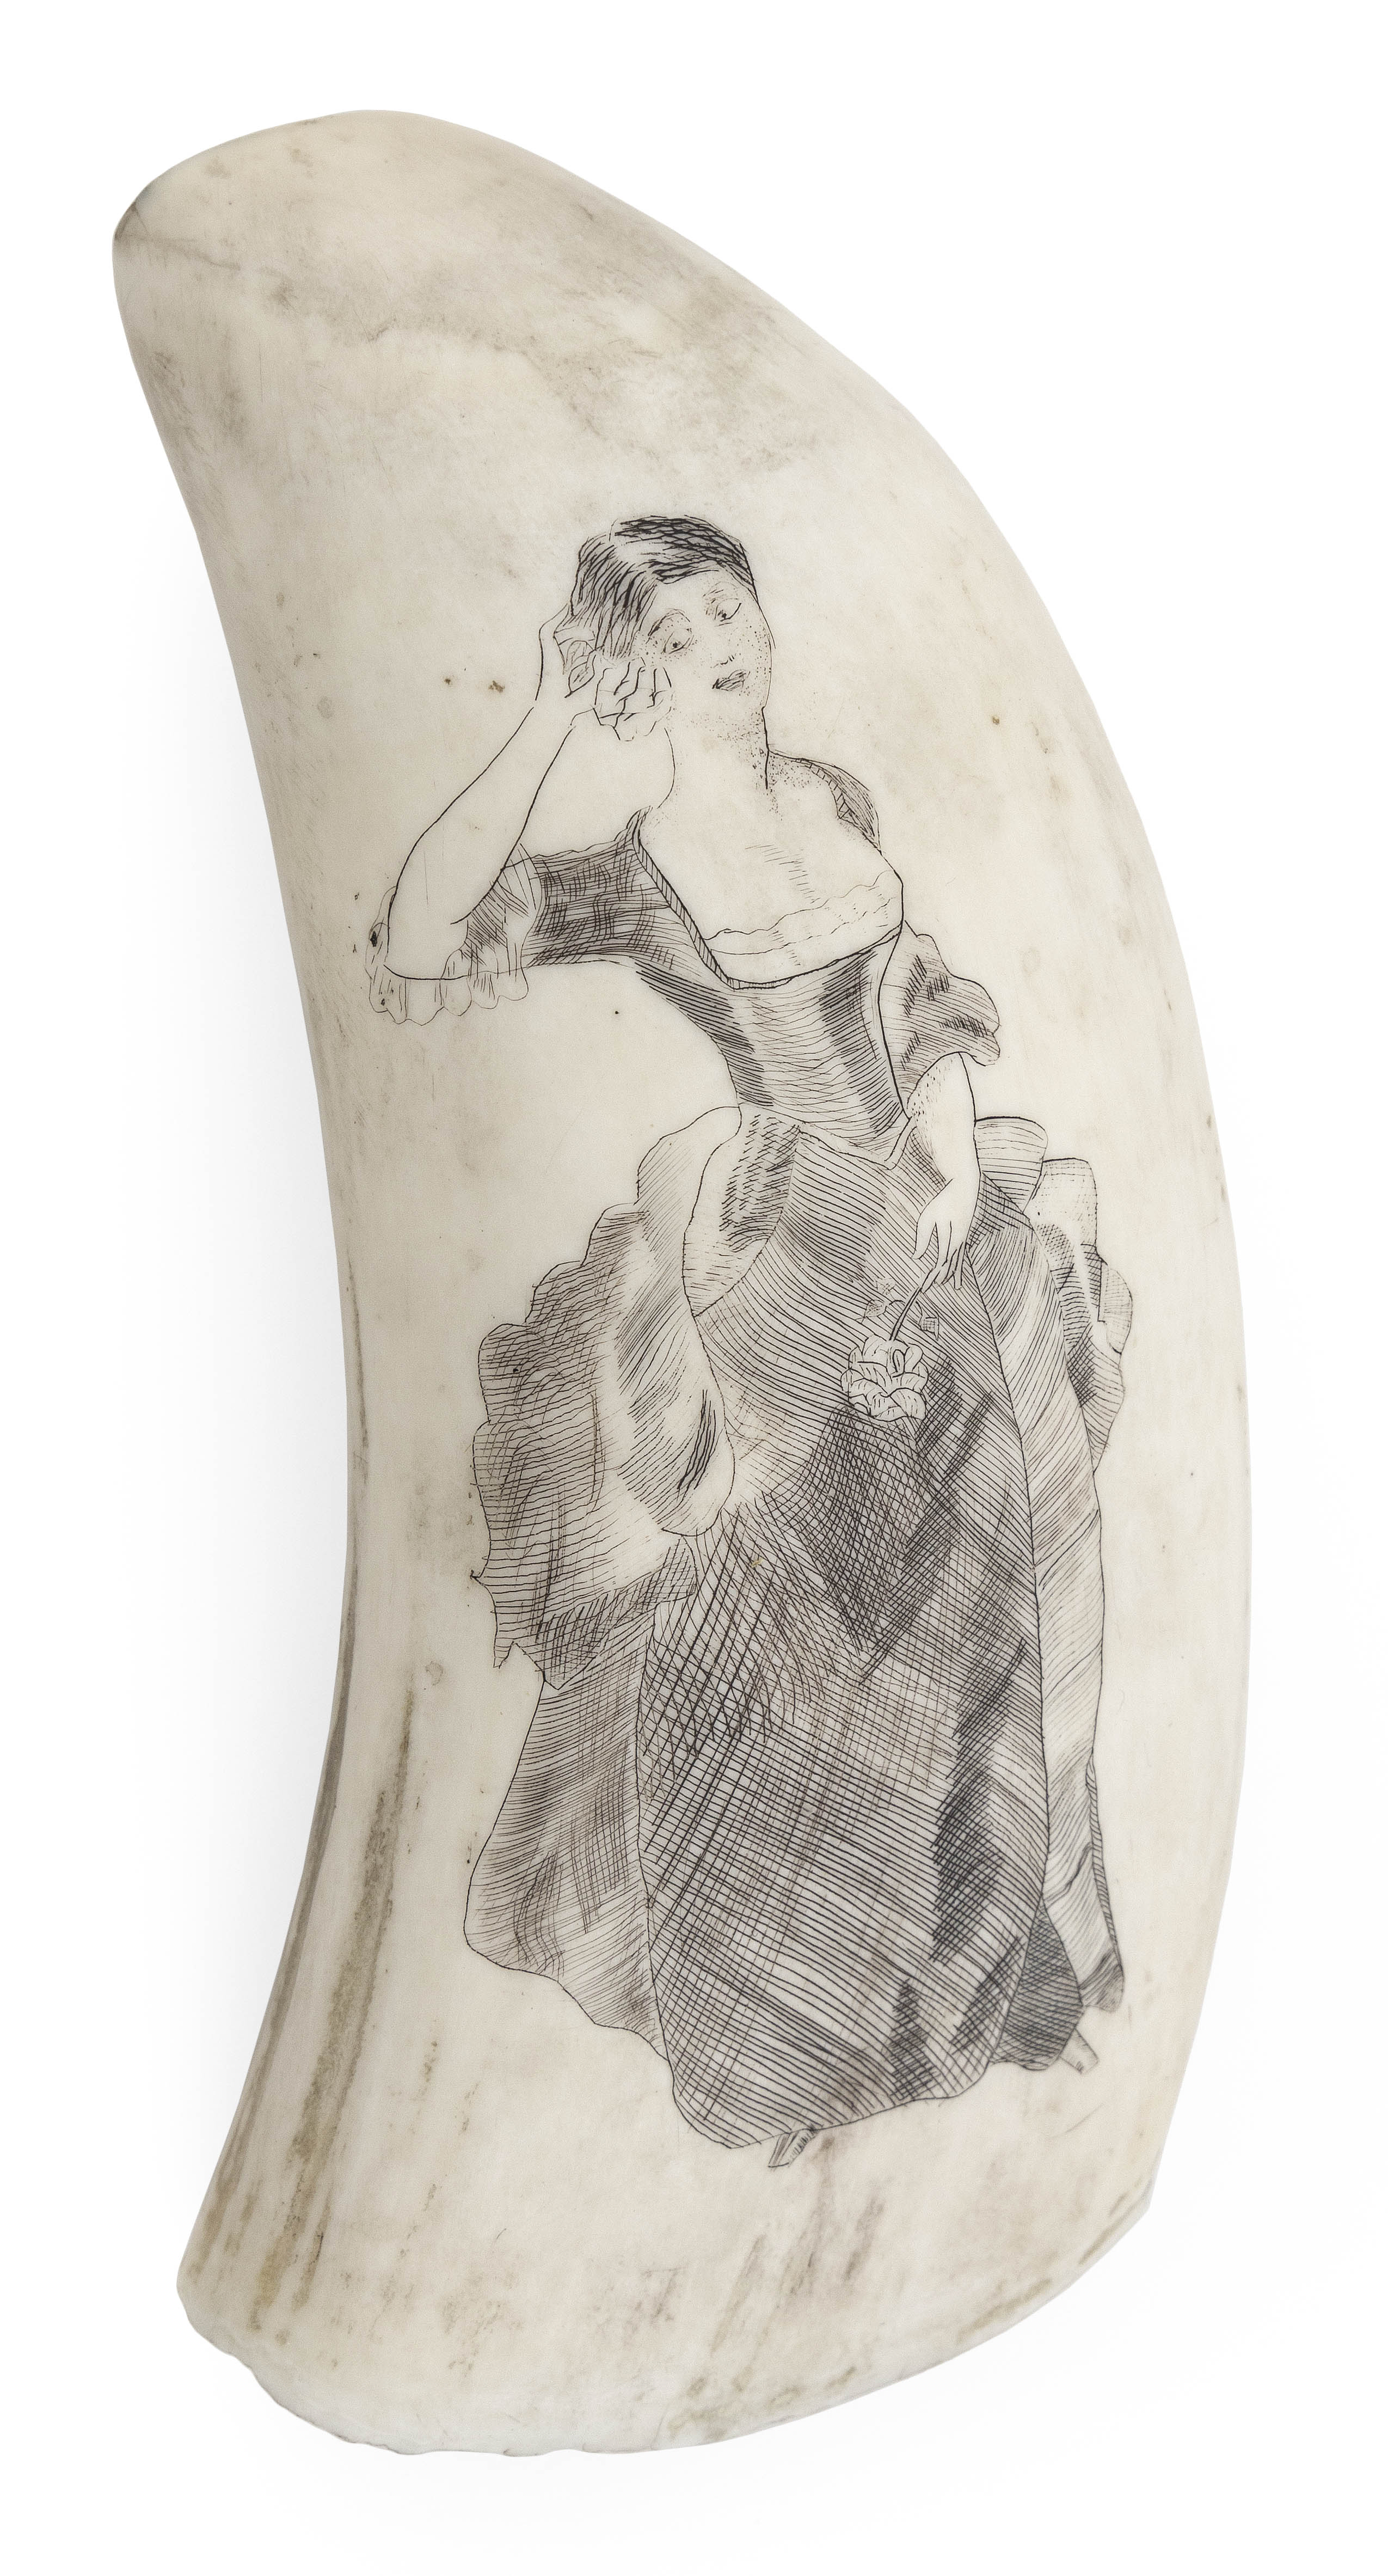 SCRIMSHAW WHALE'S TOOTH WITH FIGURAL PORTRAIT 19th Century Length 5.5